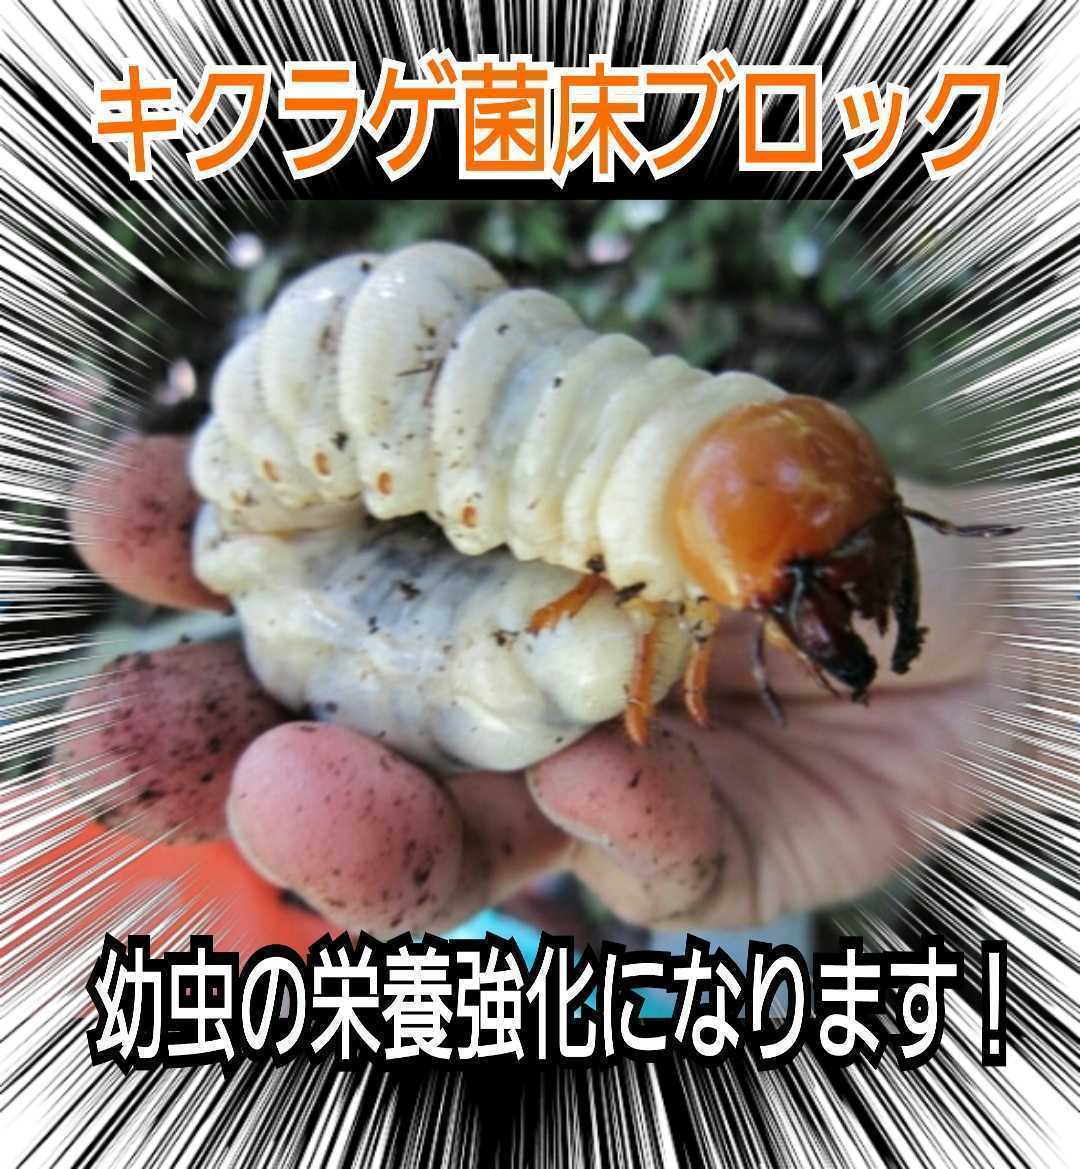  rhinoceros beetle larva. nutrition strengthen . eminent! extra-large 3500cc*ki jellyfish . floor block block. .. mat . embed only! stag beetle. production egg floor also possible to use!